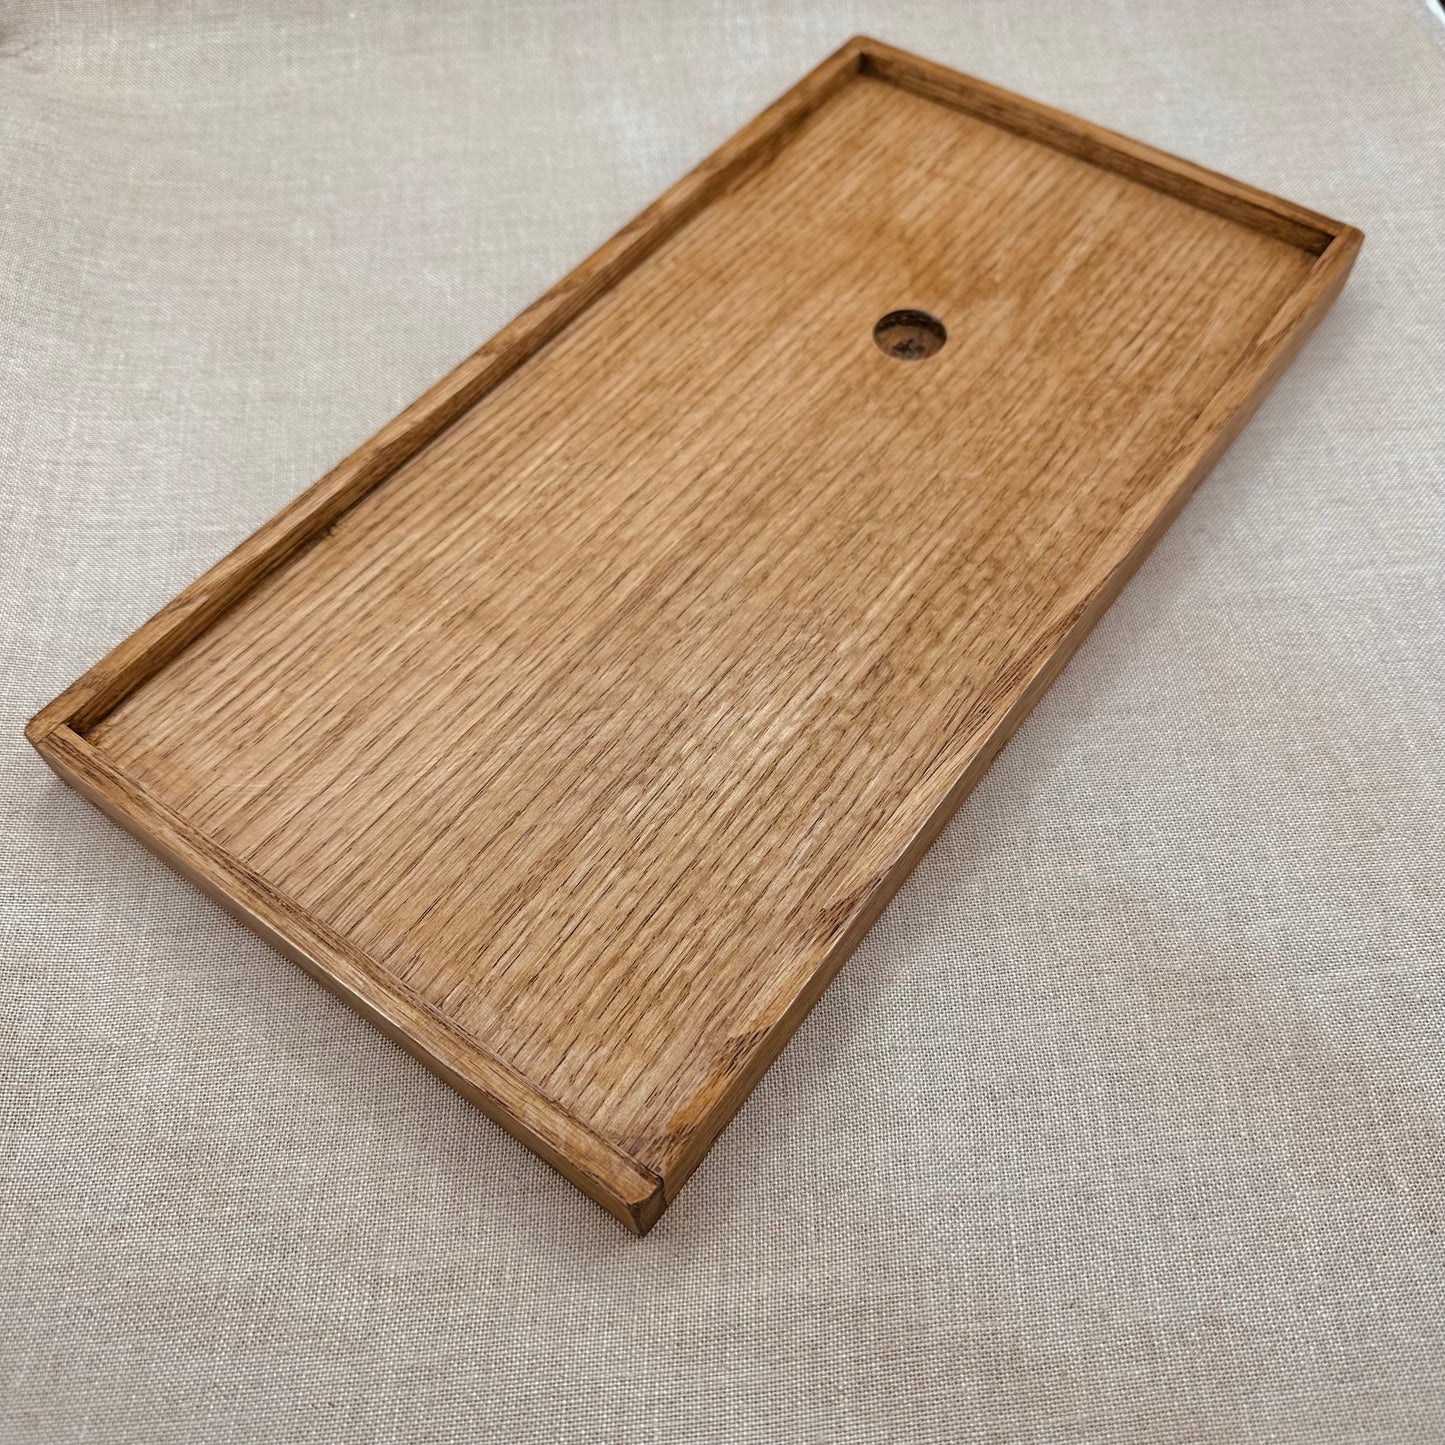 Hearthside Craftworks at Evertote - Accessory Tray